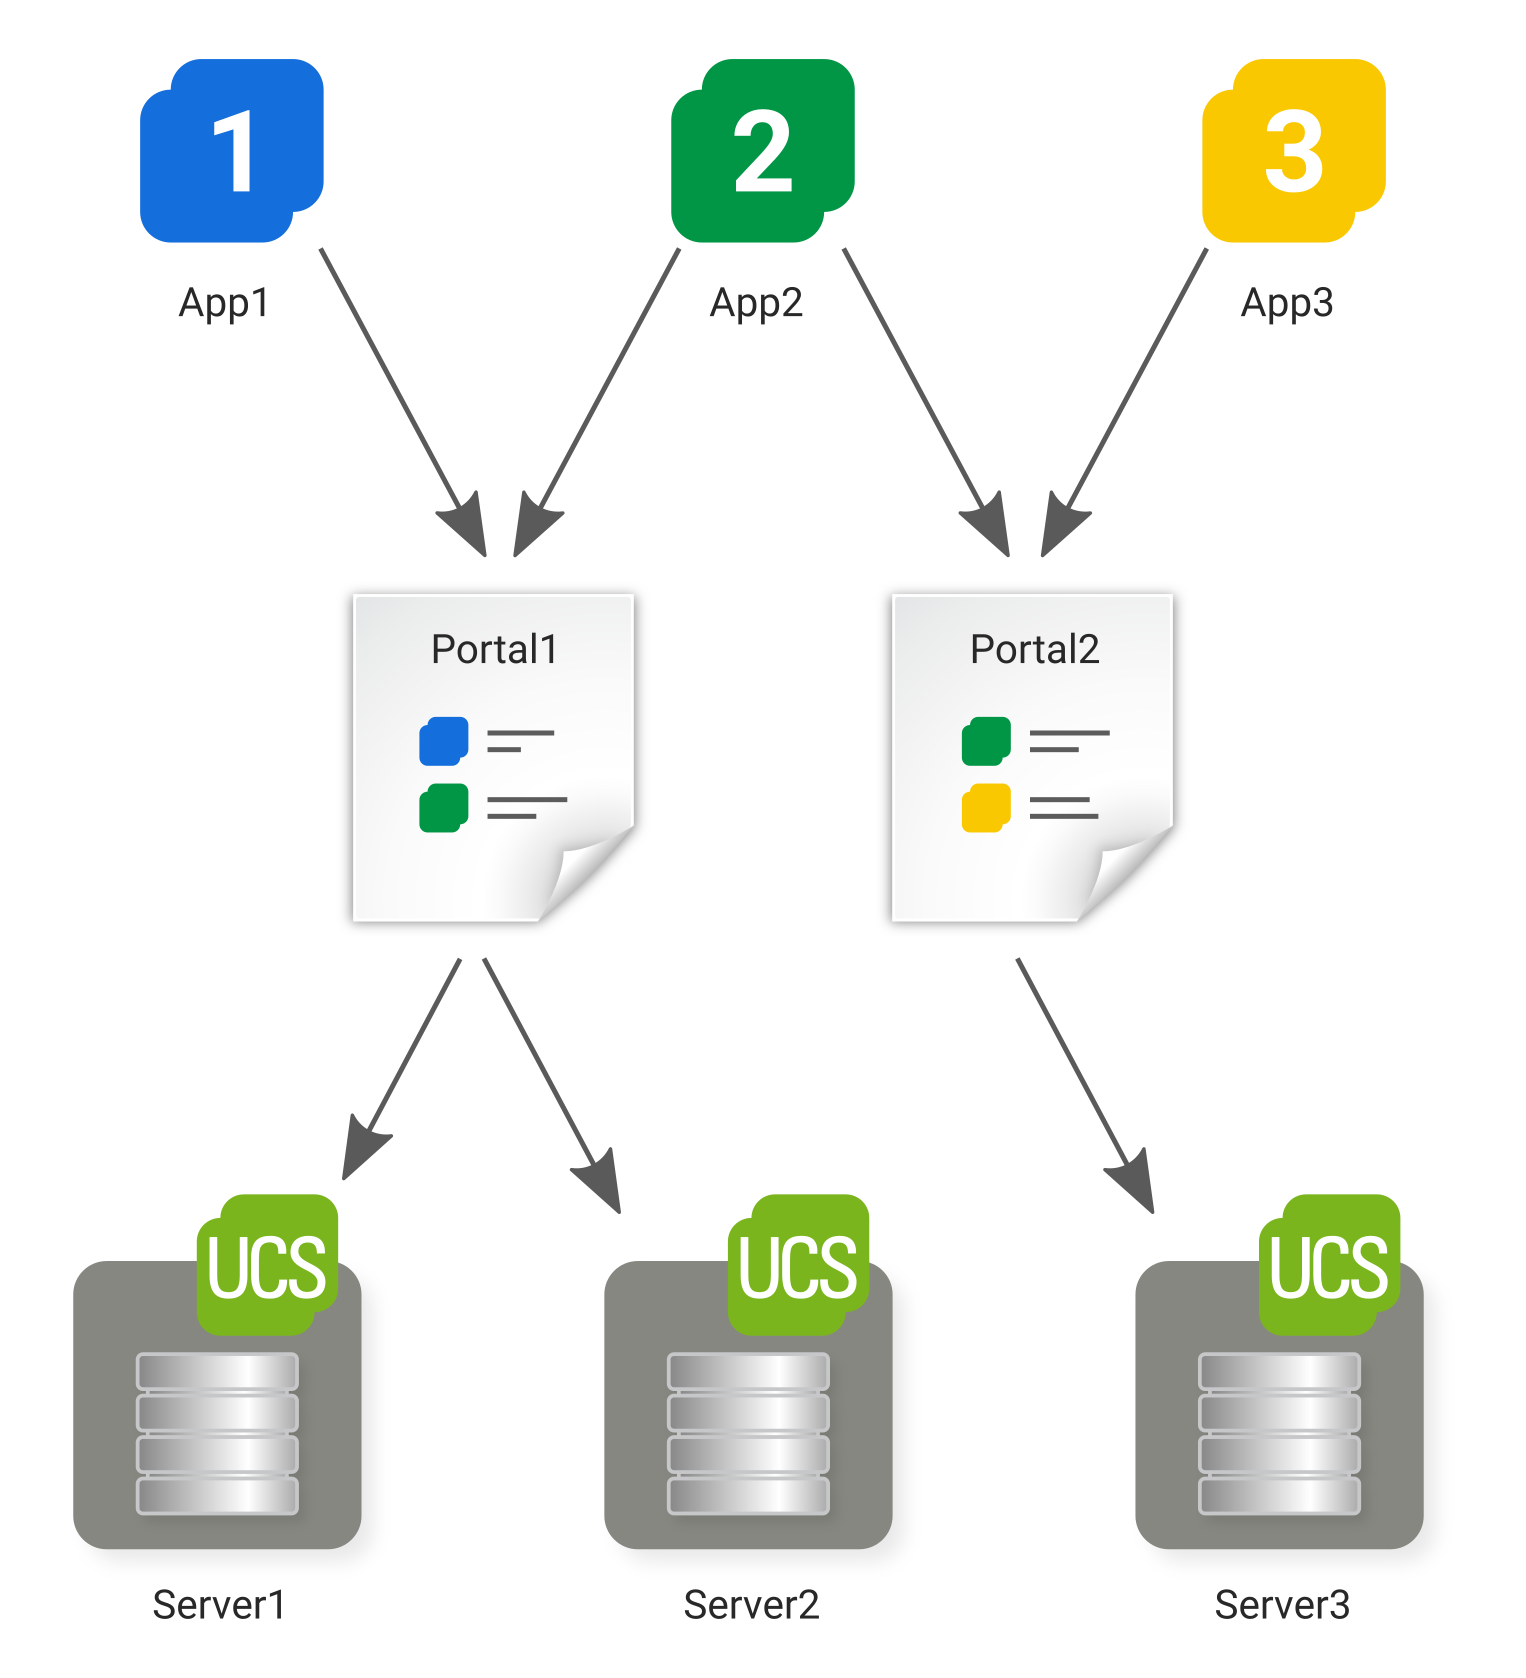 Schema of the portal concept in UCS: Portals can be independently defined and assigned to UCS systems as start site; a link entry can be displayed on multiple portals.